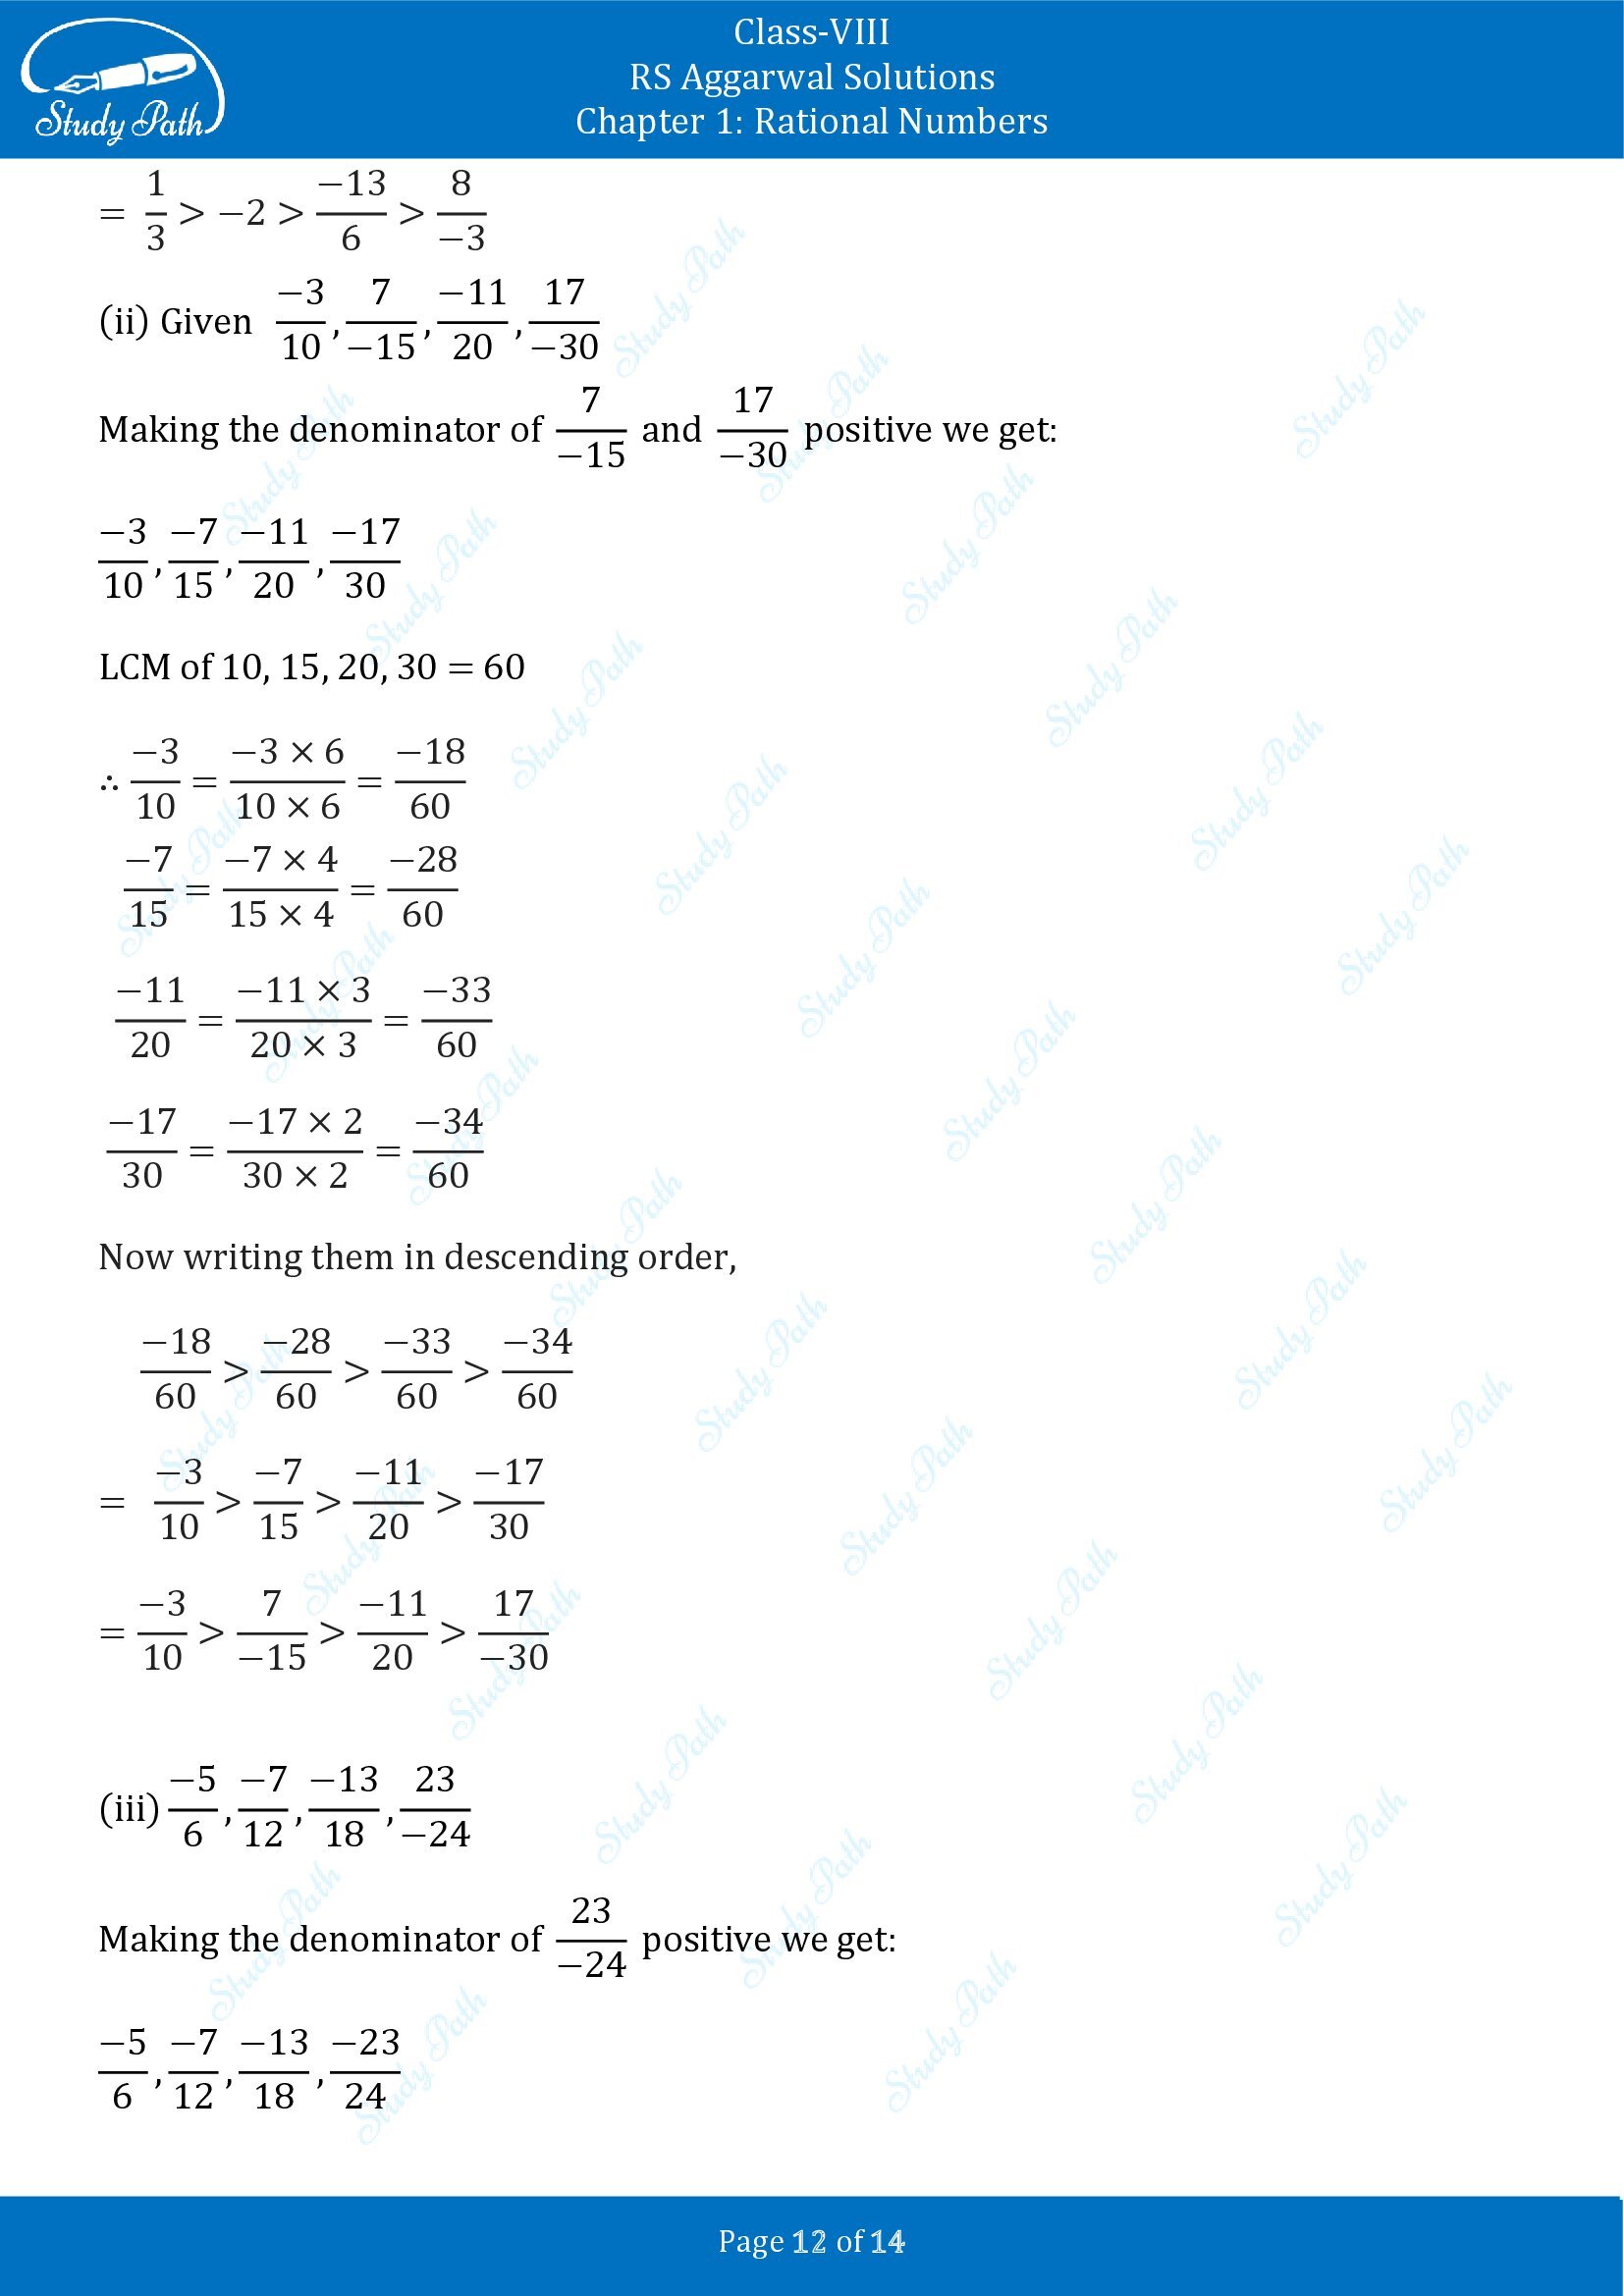 RS Aggarwal Solutions Class 8 Chapter 1 Rational Numbers Exercise 1A 00012